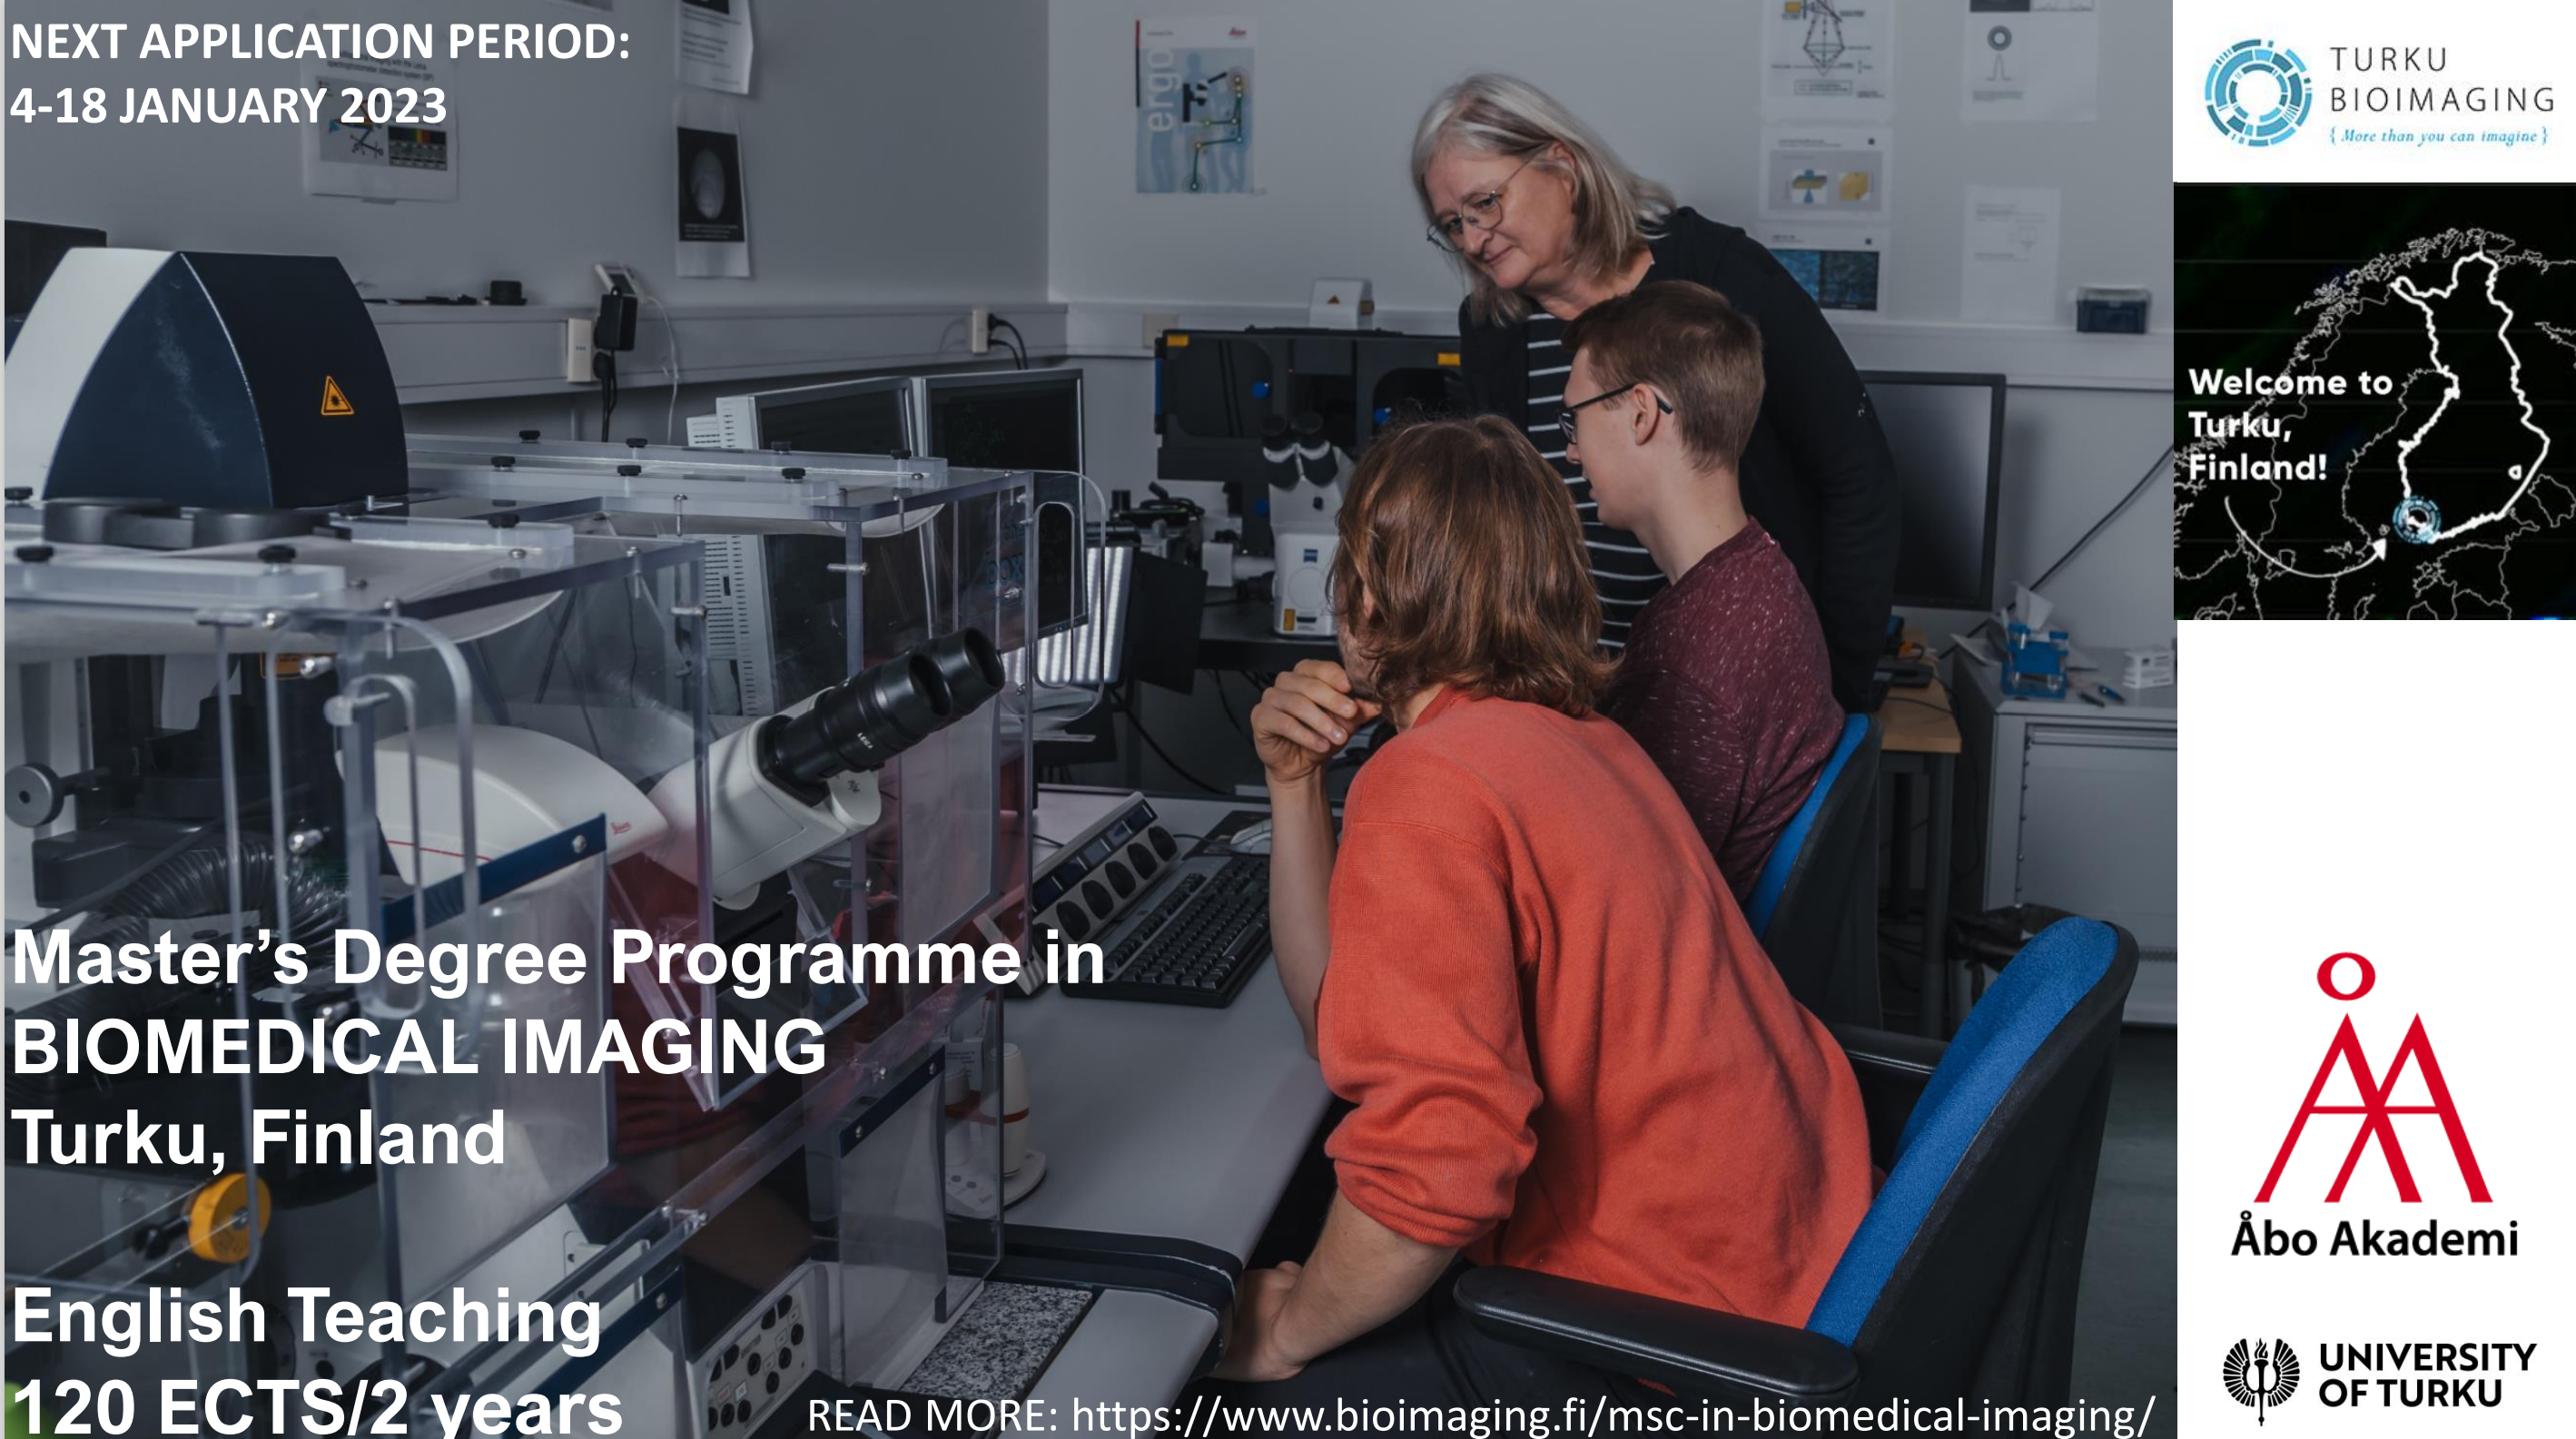 Internship opportunities for tomorrow’s imaging scientists